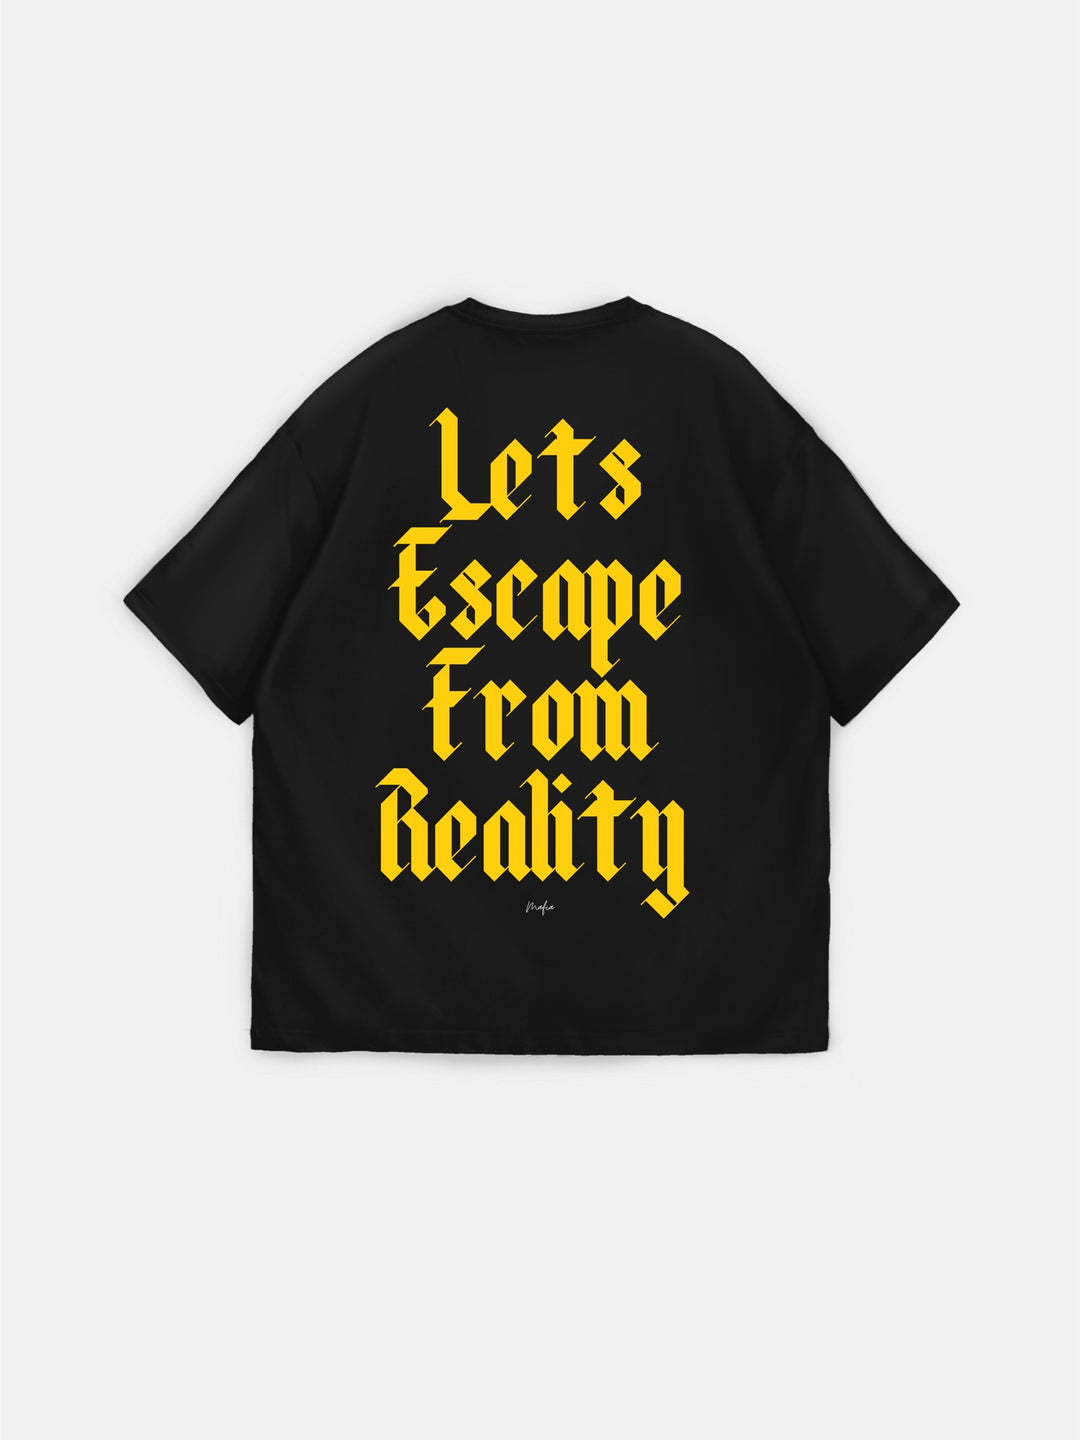 Oversize Let's Escape T-shirt - Black and Yellow